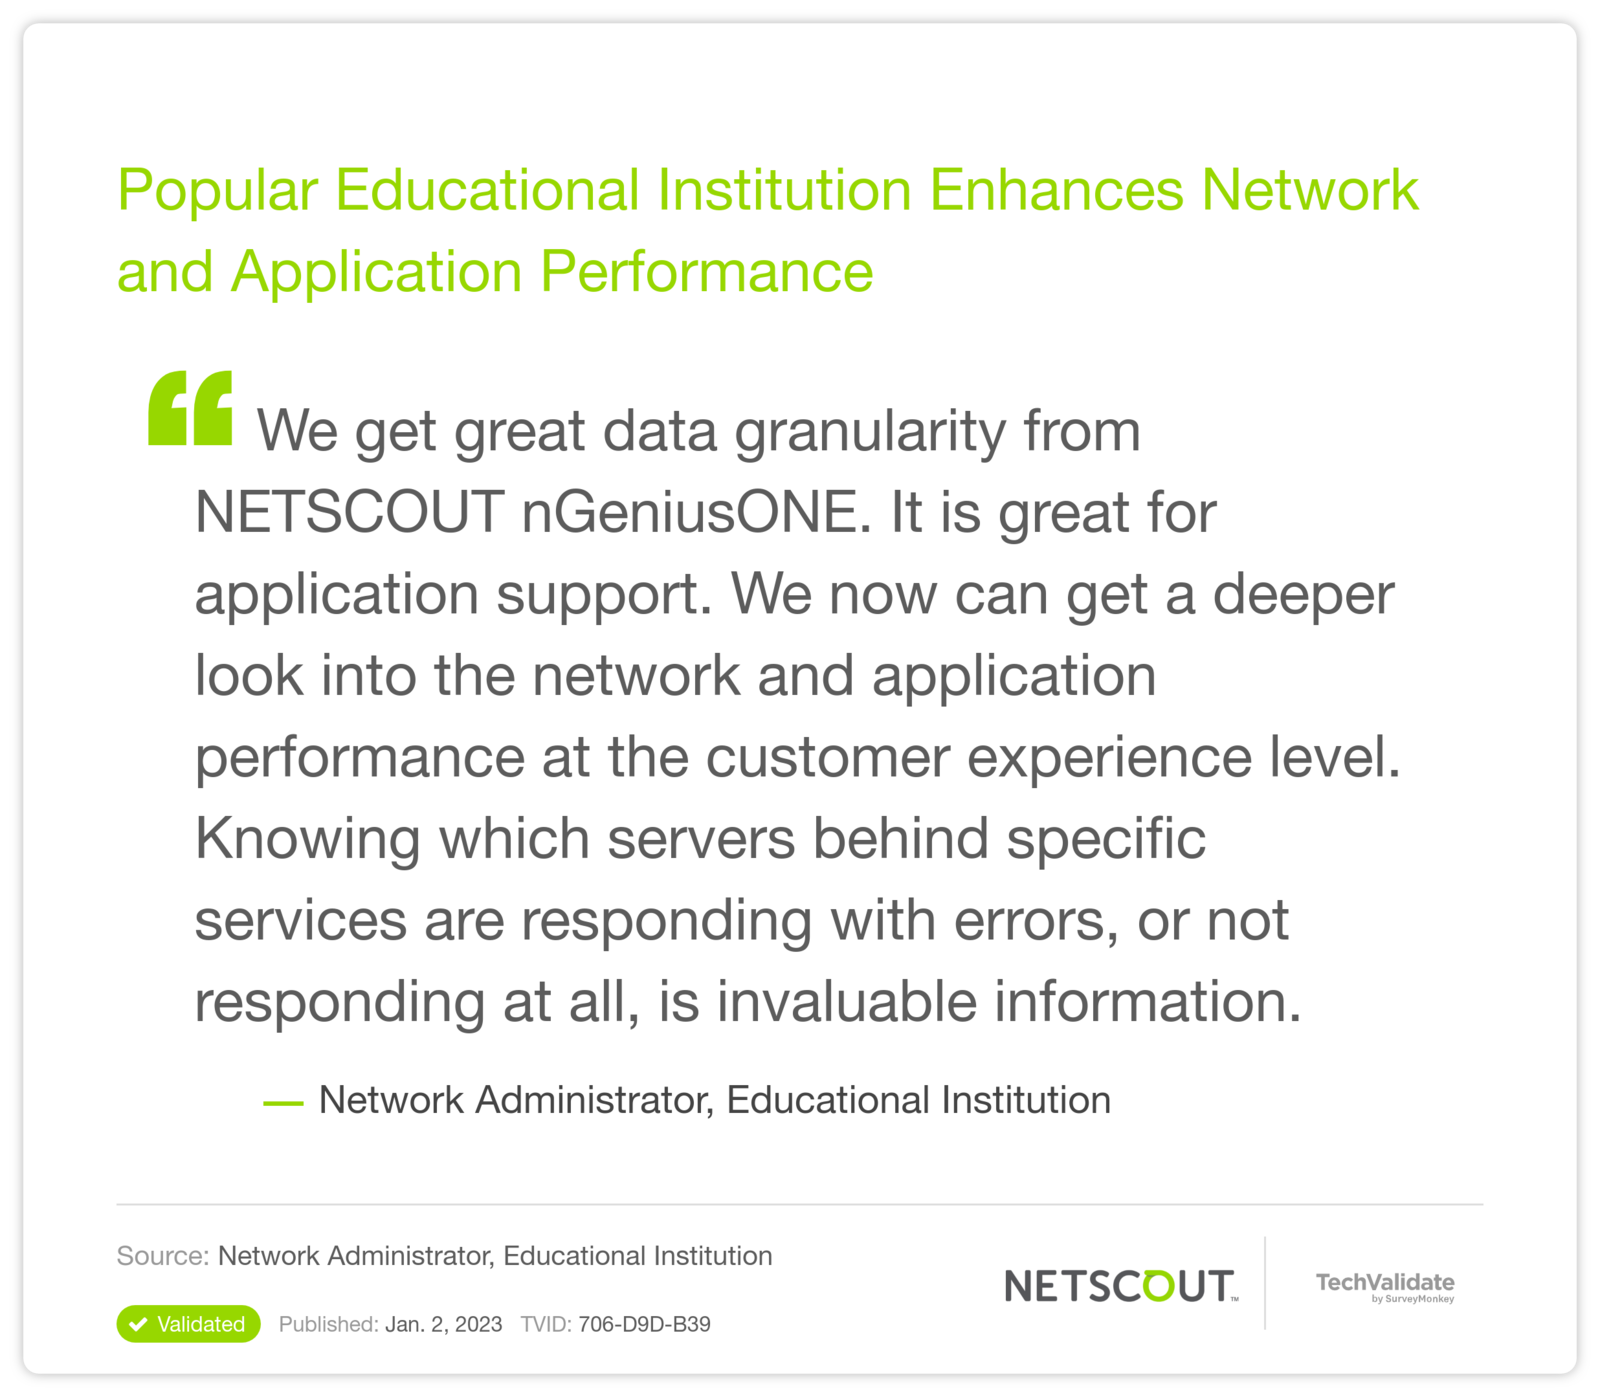 Popular Educational Institution Enhances Network and Application Performance